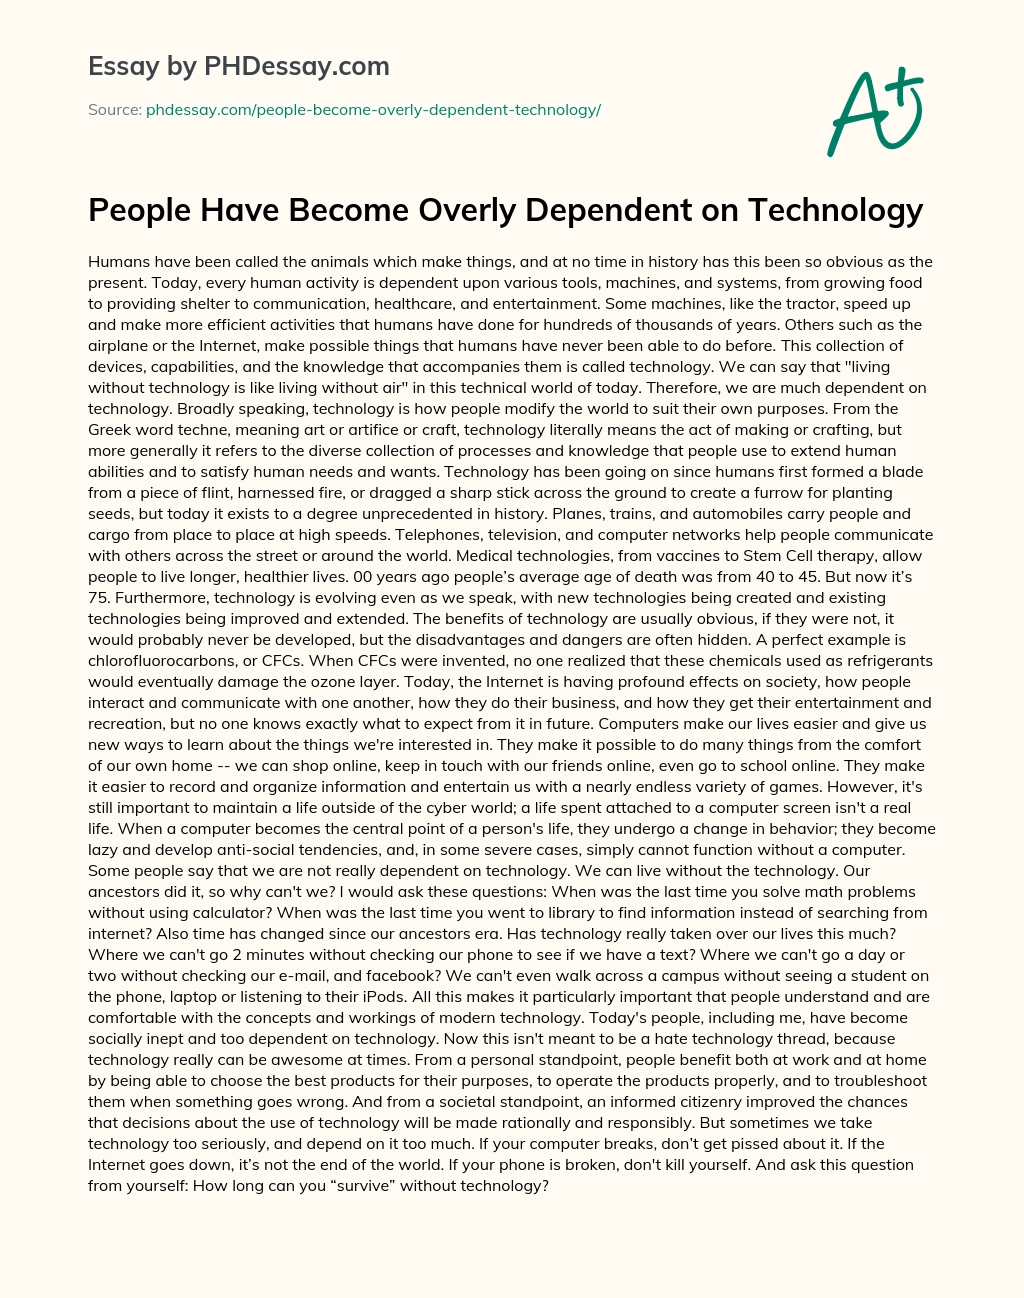 people have become overly dependent on technology article